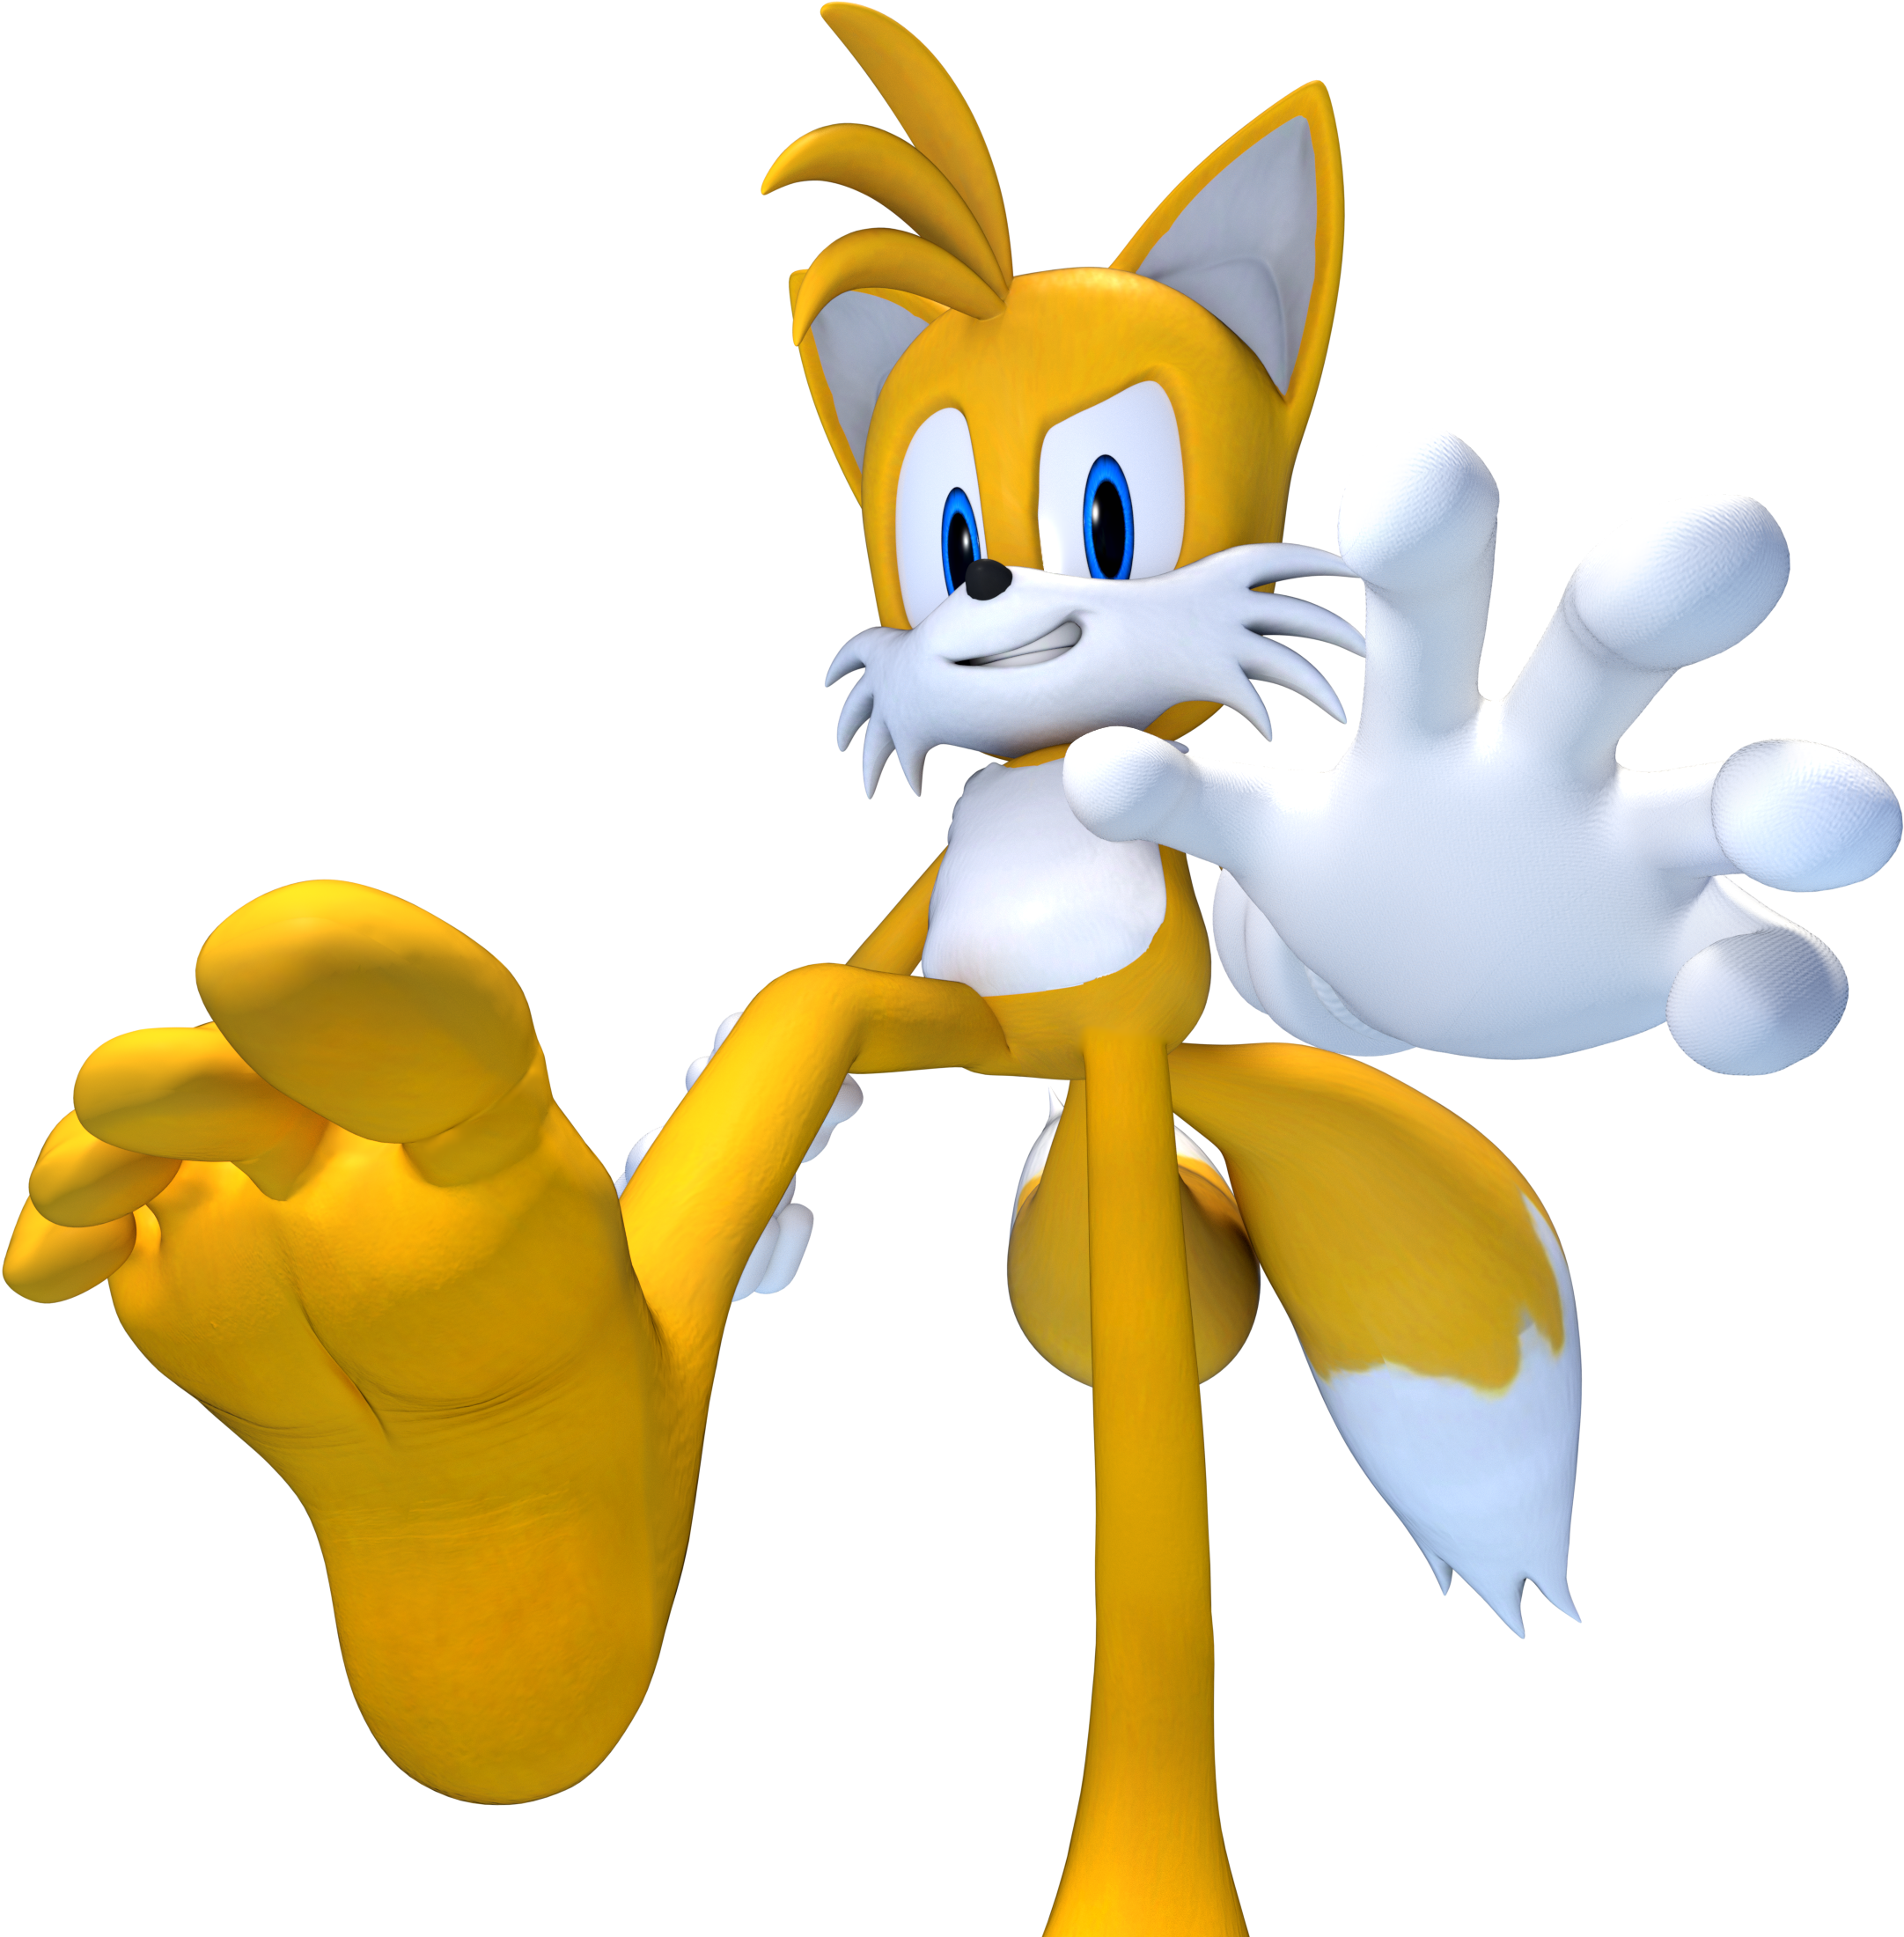 Tails The Giant By Feetymcfoot - Tails The Fox Feet (2200x2244)